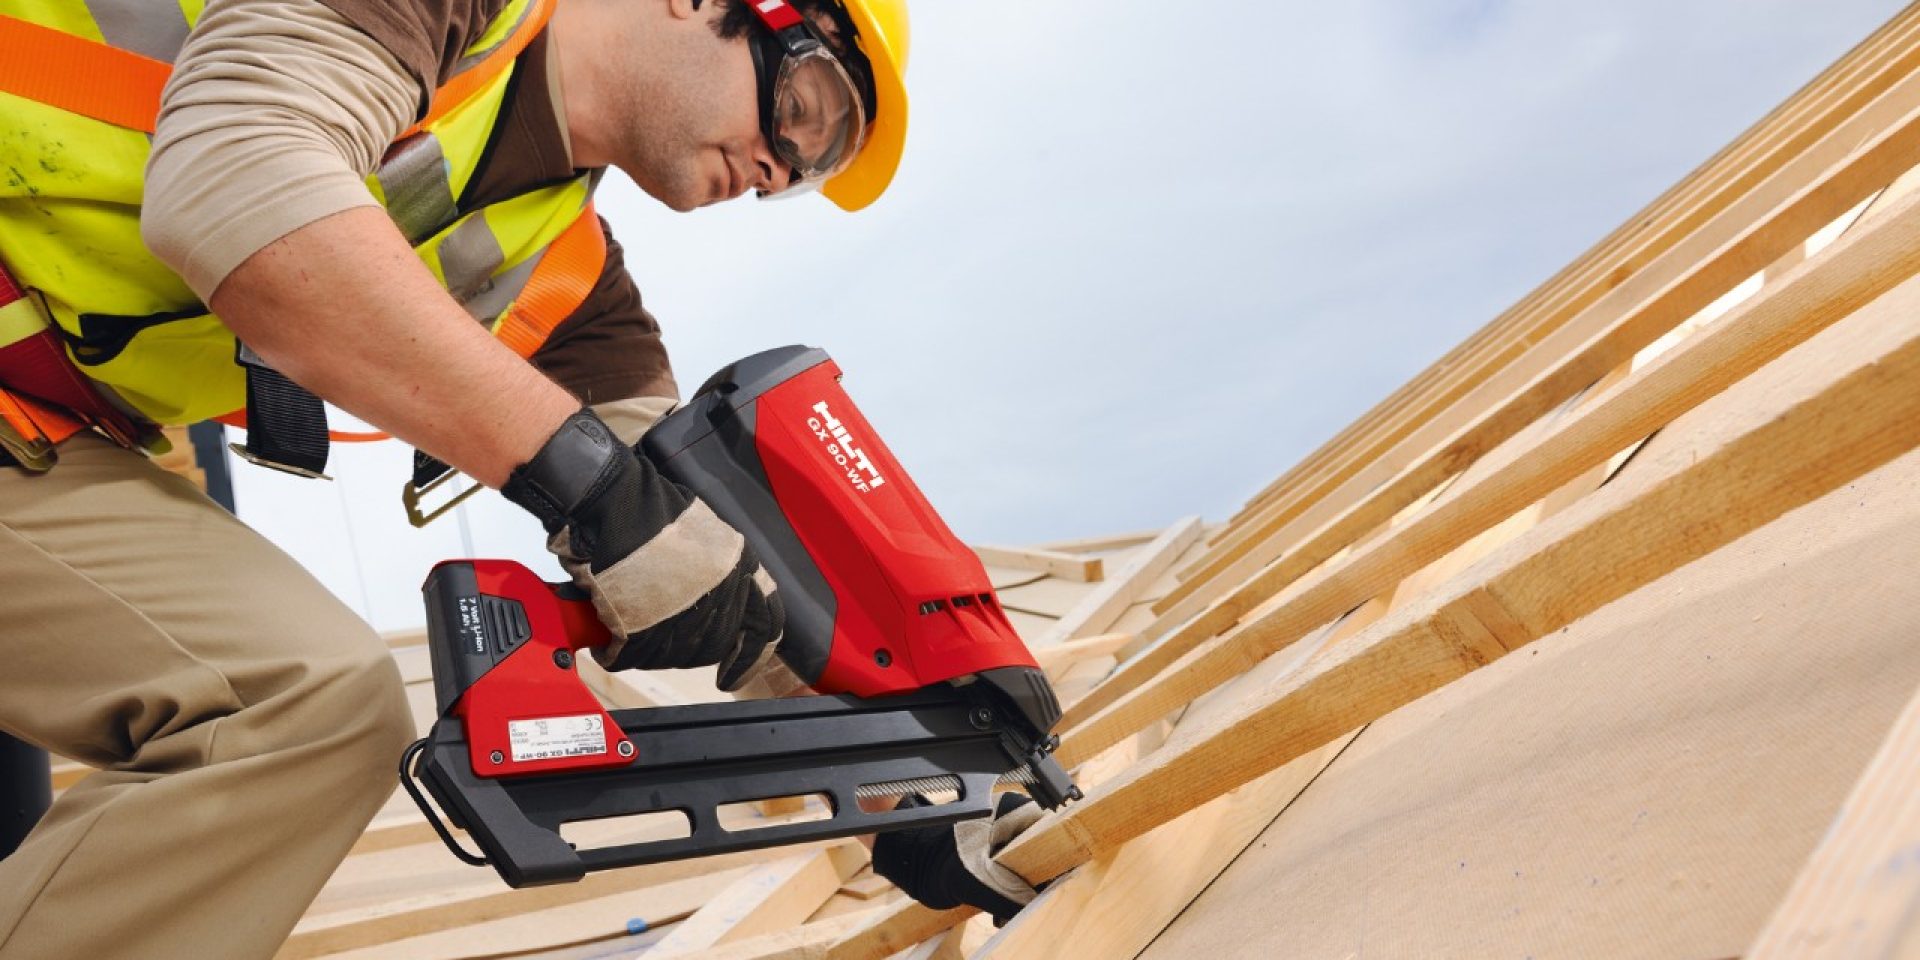 Hilti GX 90-WF gas-actuated fastening tool for wood framing applications